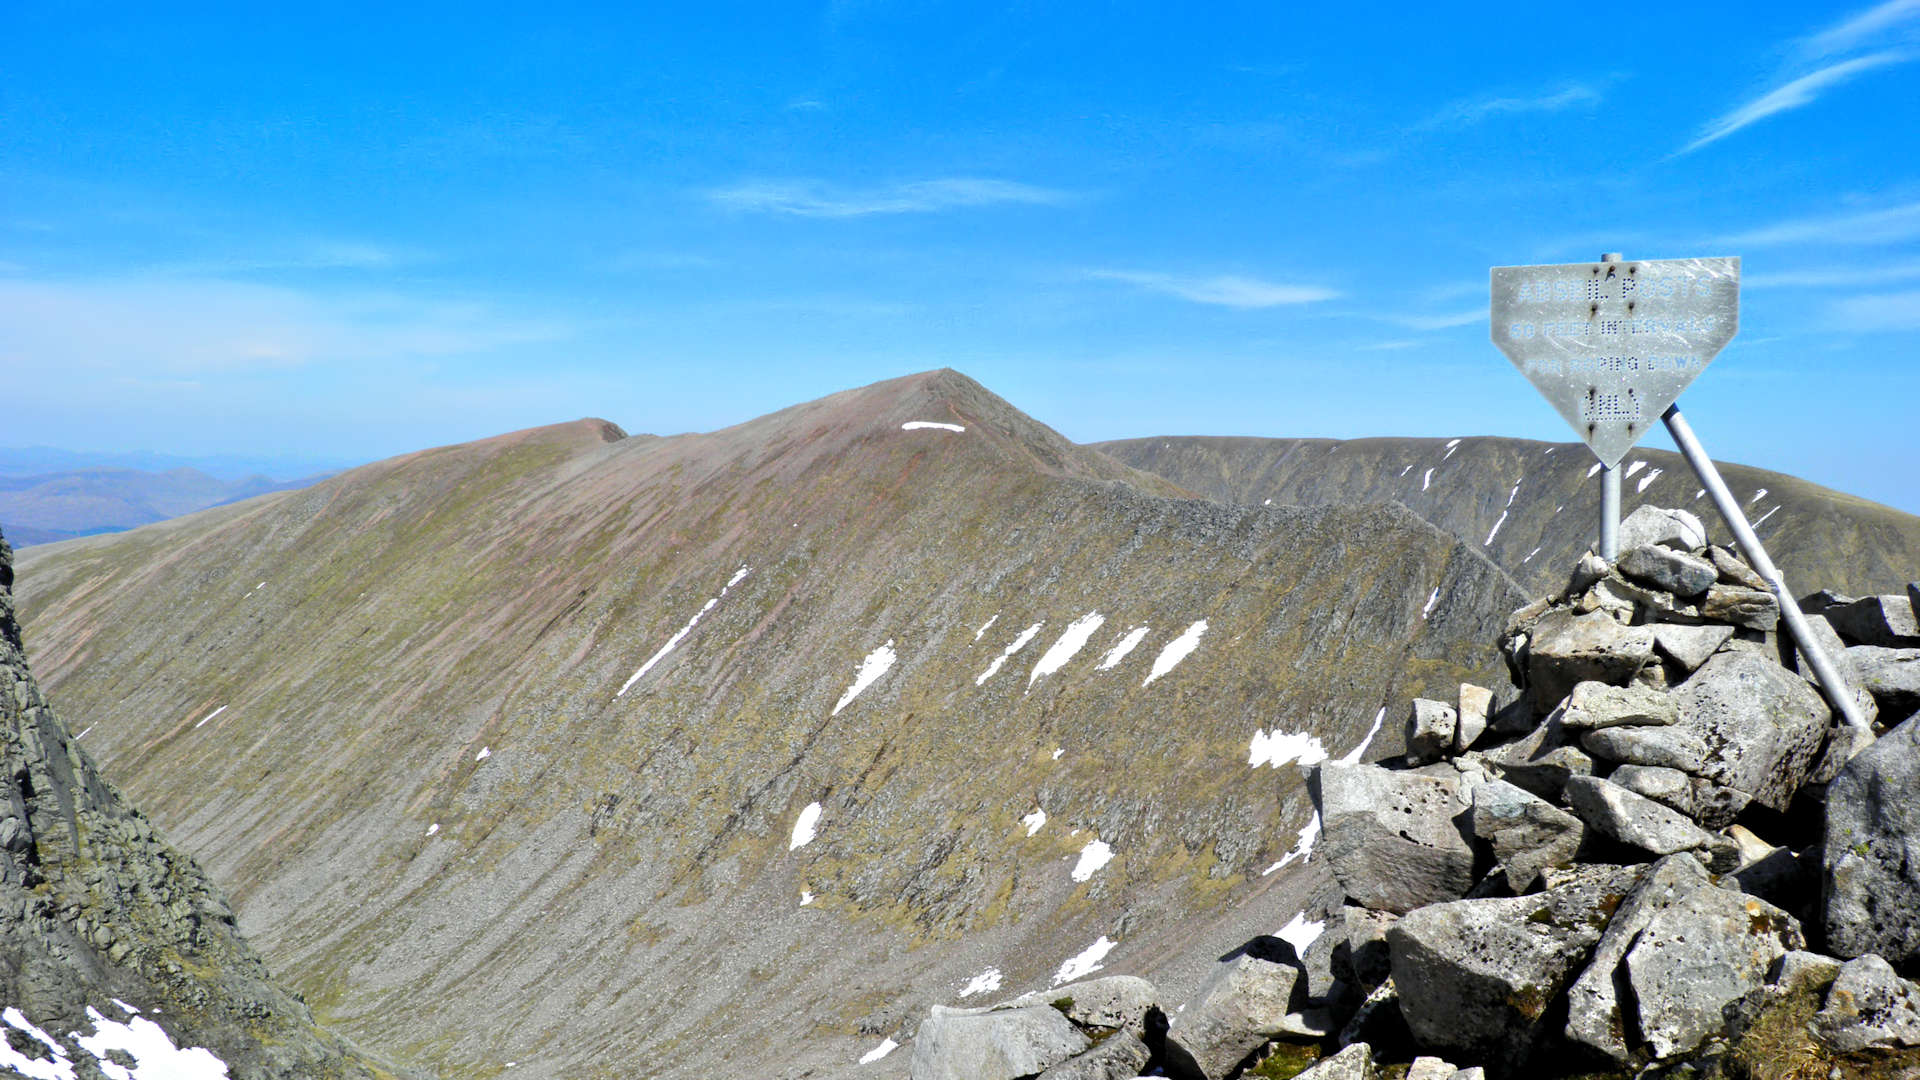 Looking to Carn Mor Dearg from the top of the abseil posts